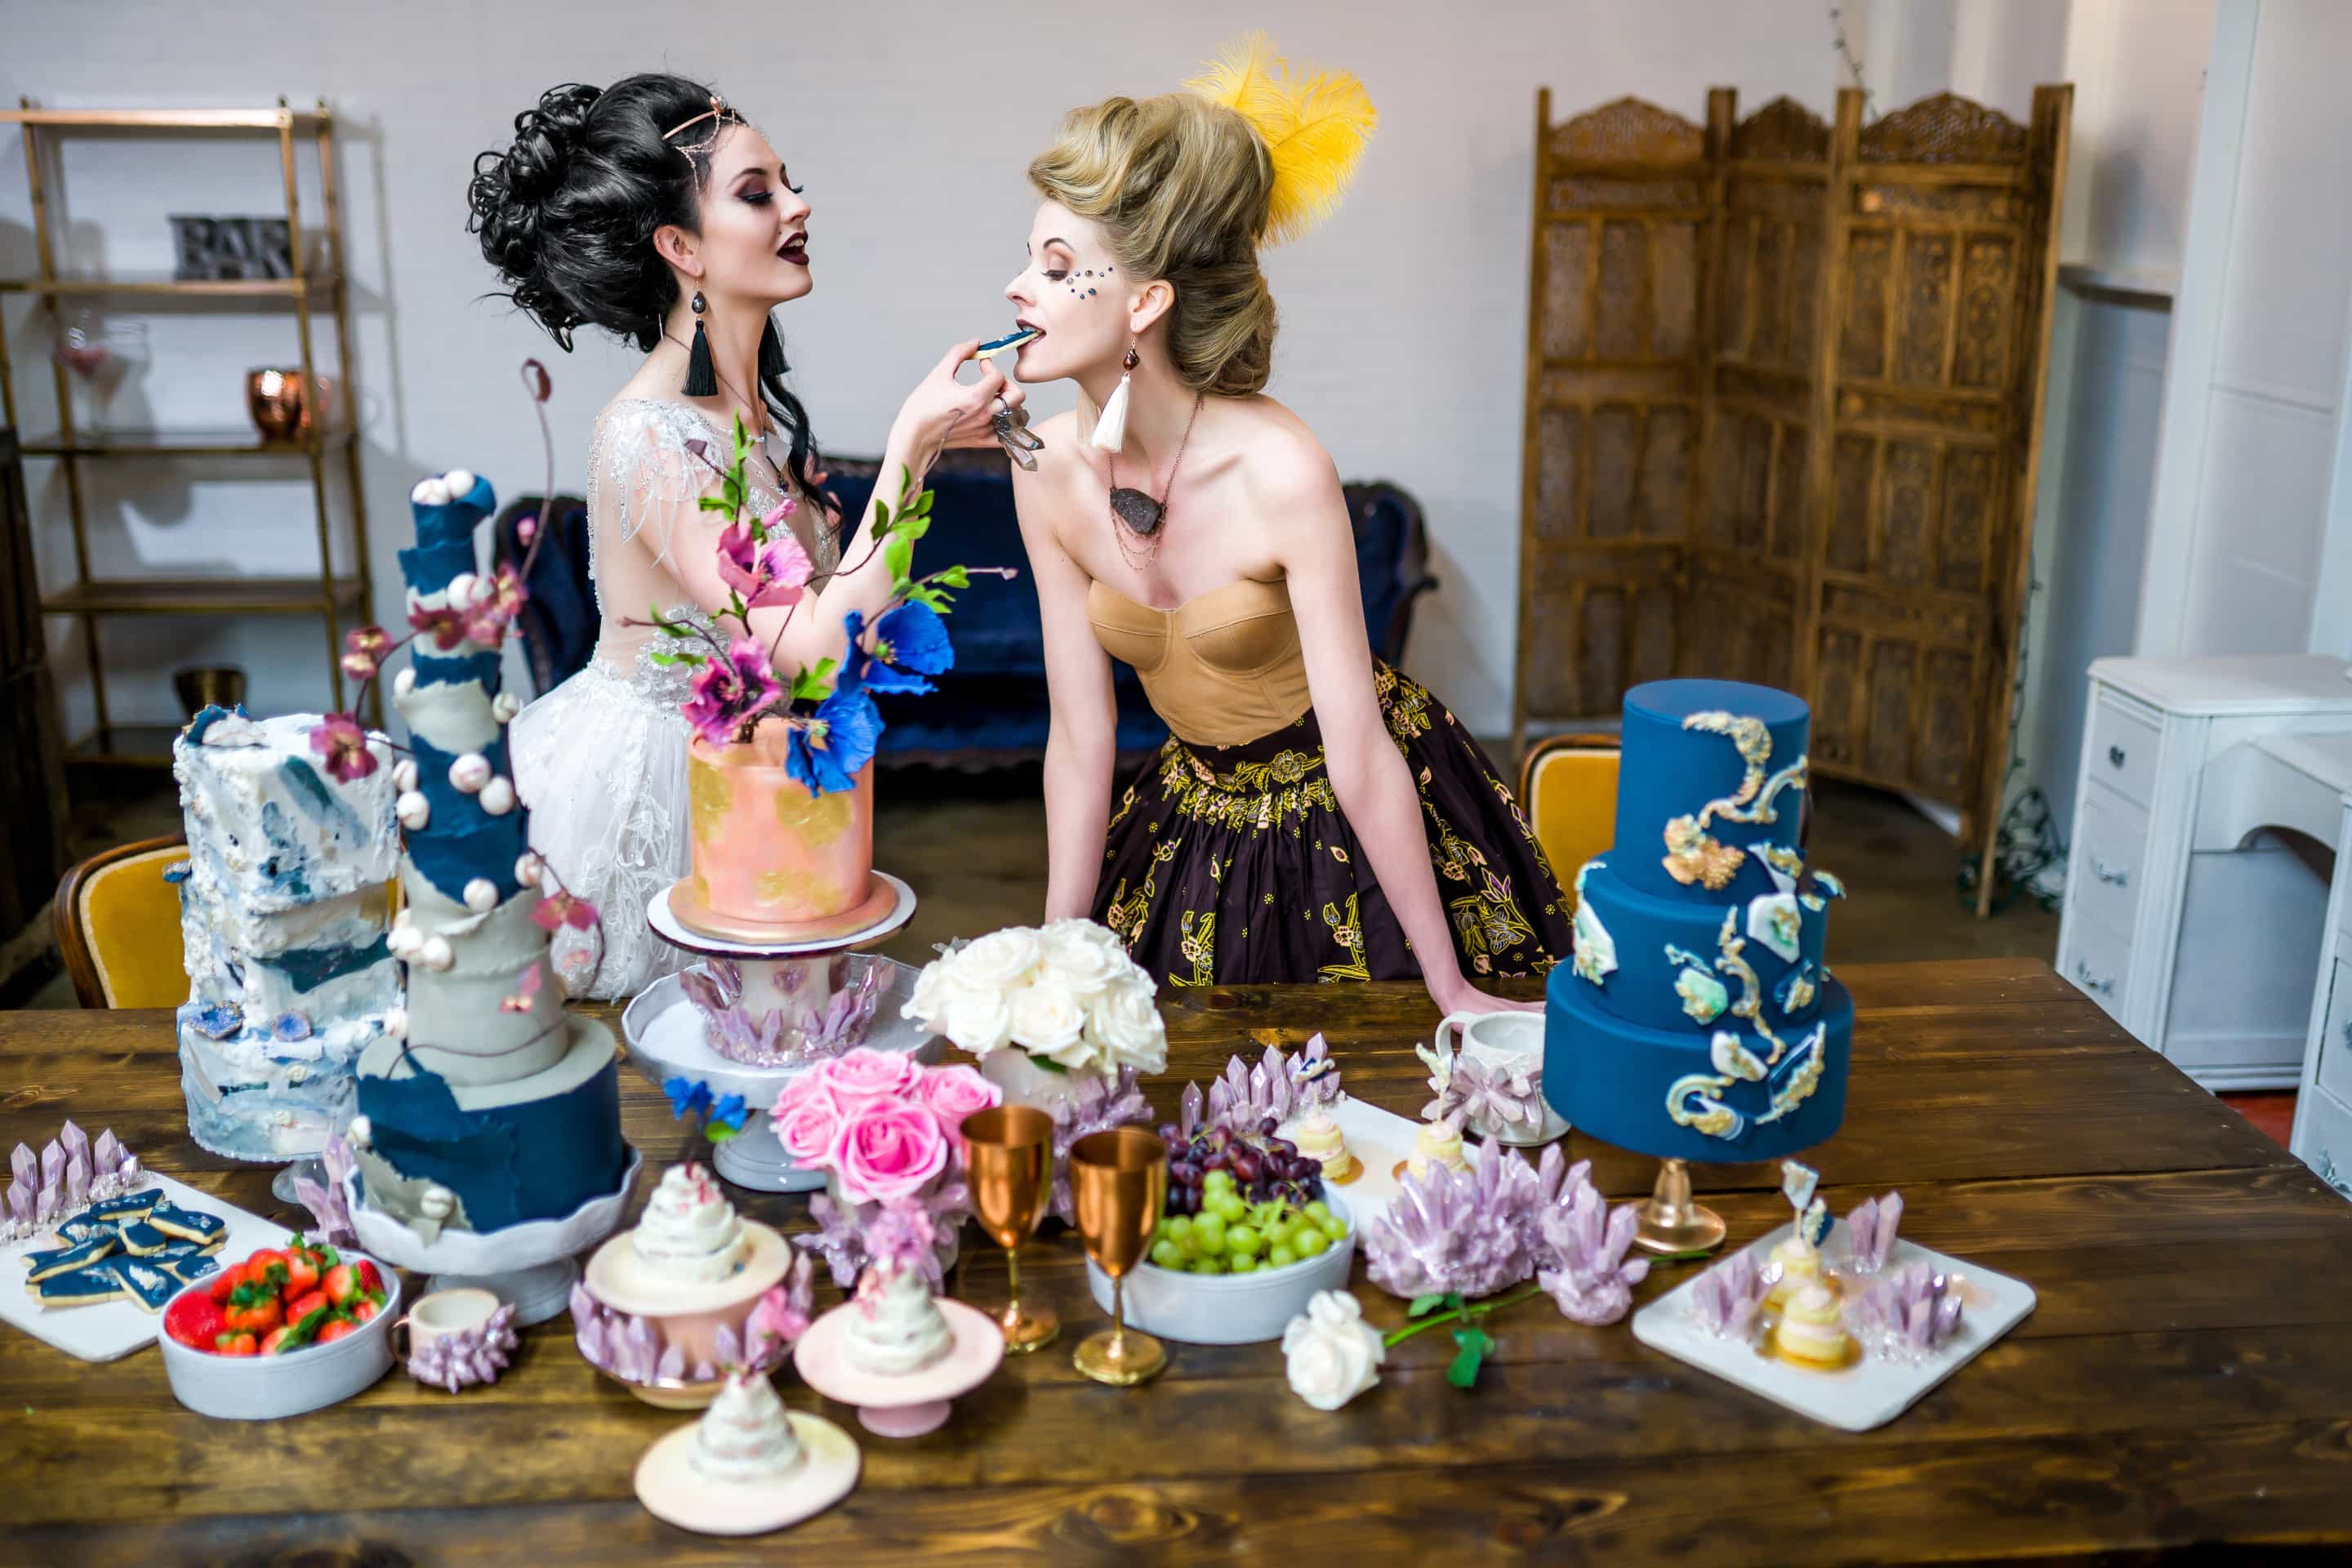 Models eating cake and wearing Desert Daisy Jewelry from the Marie Collection